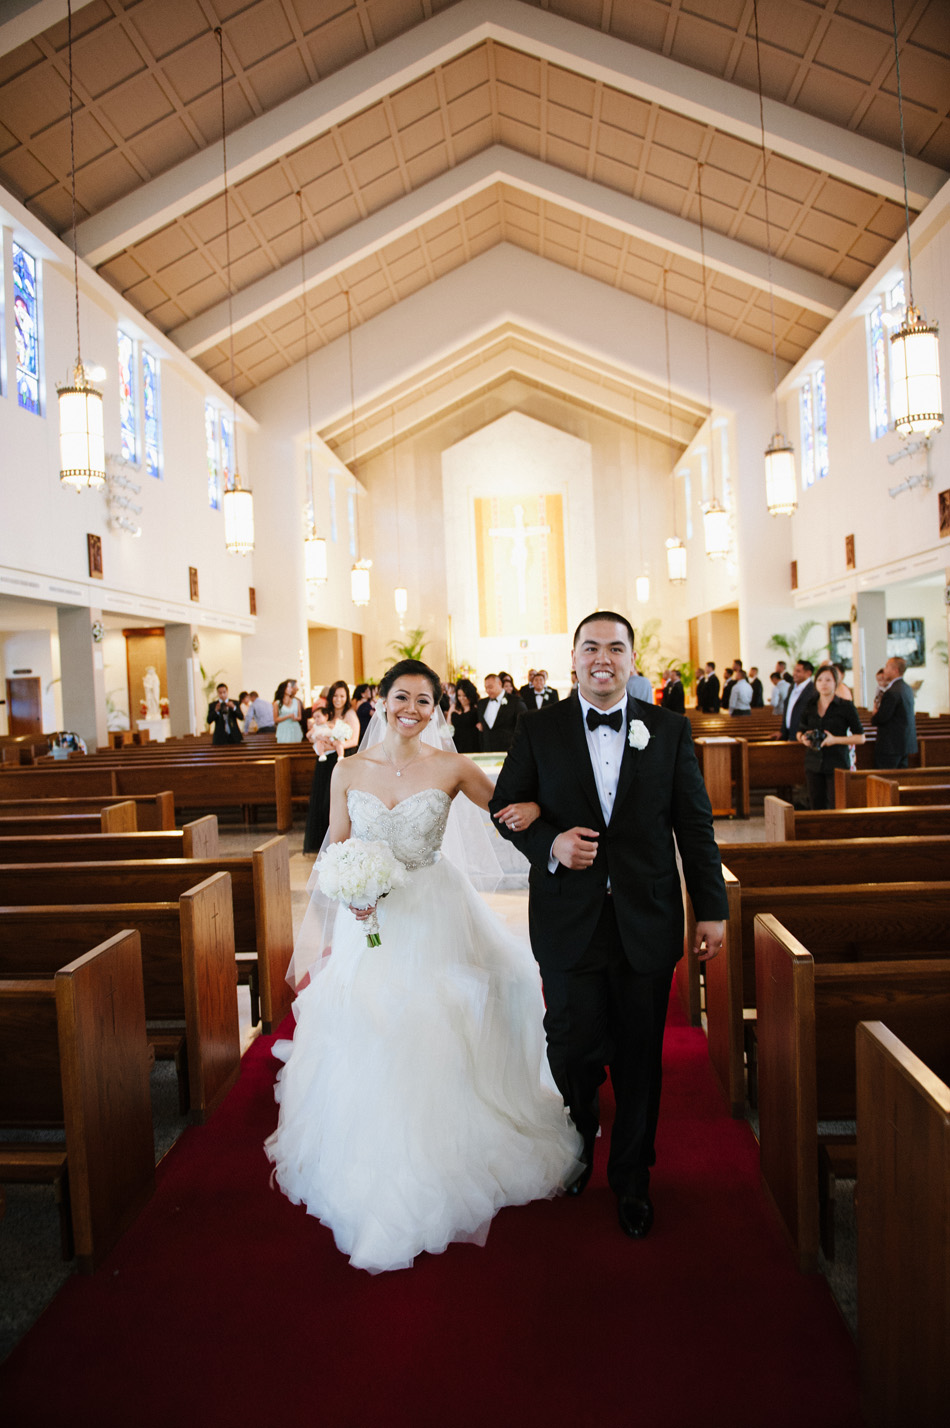 Wedding at St. Theresa Co-Cathedral